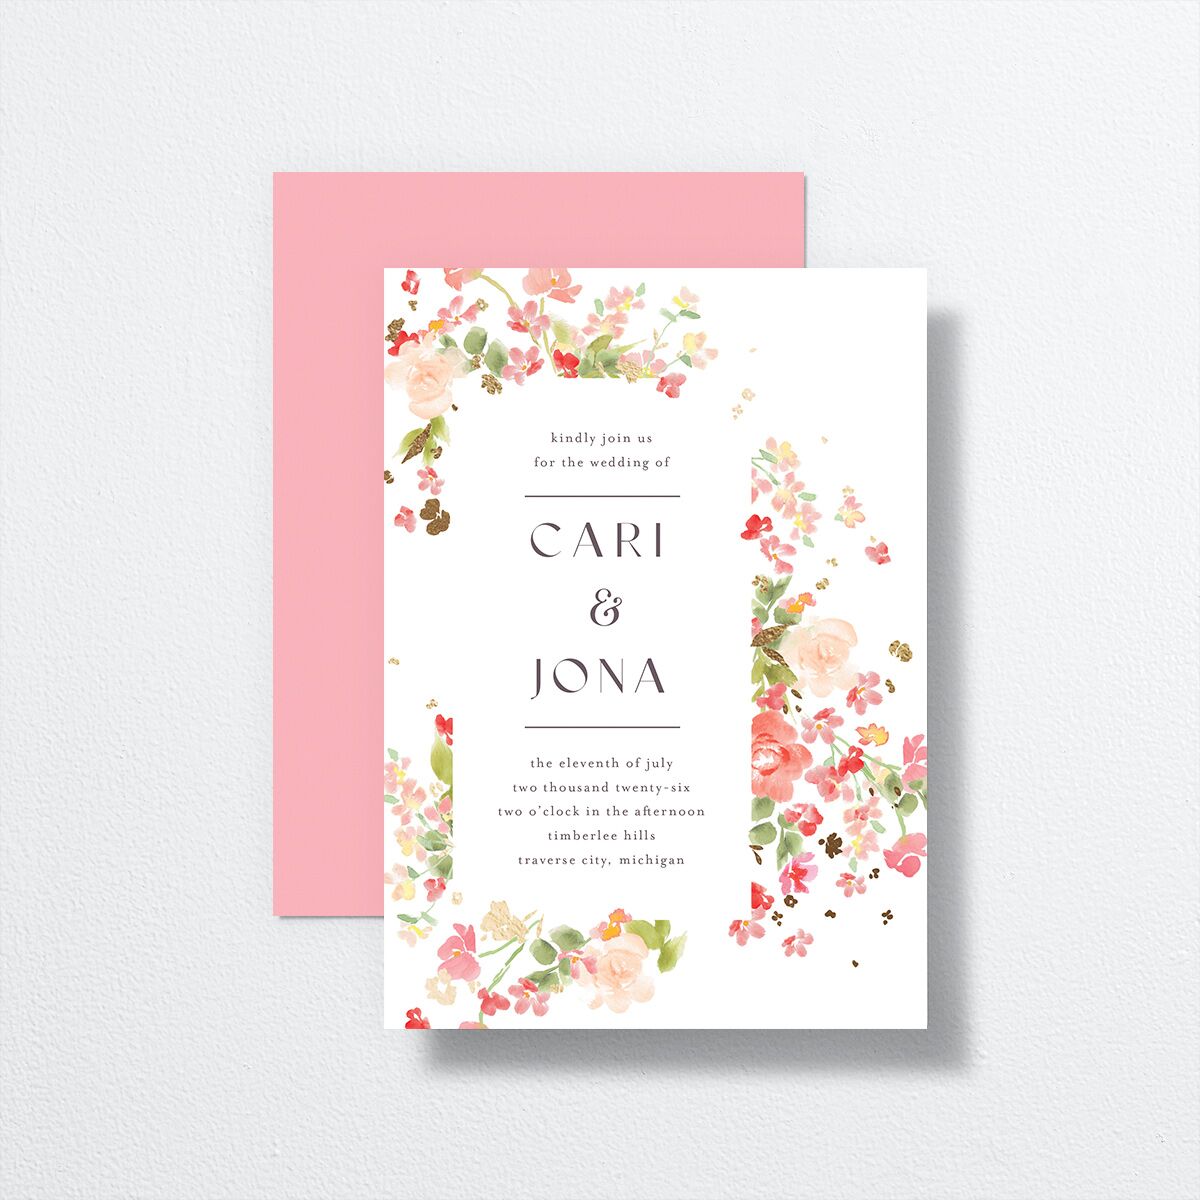 Scattered Blossoms Wedding Invitations front-and-back in pink